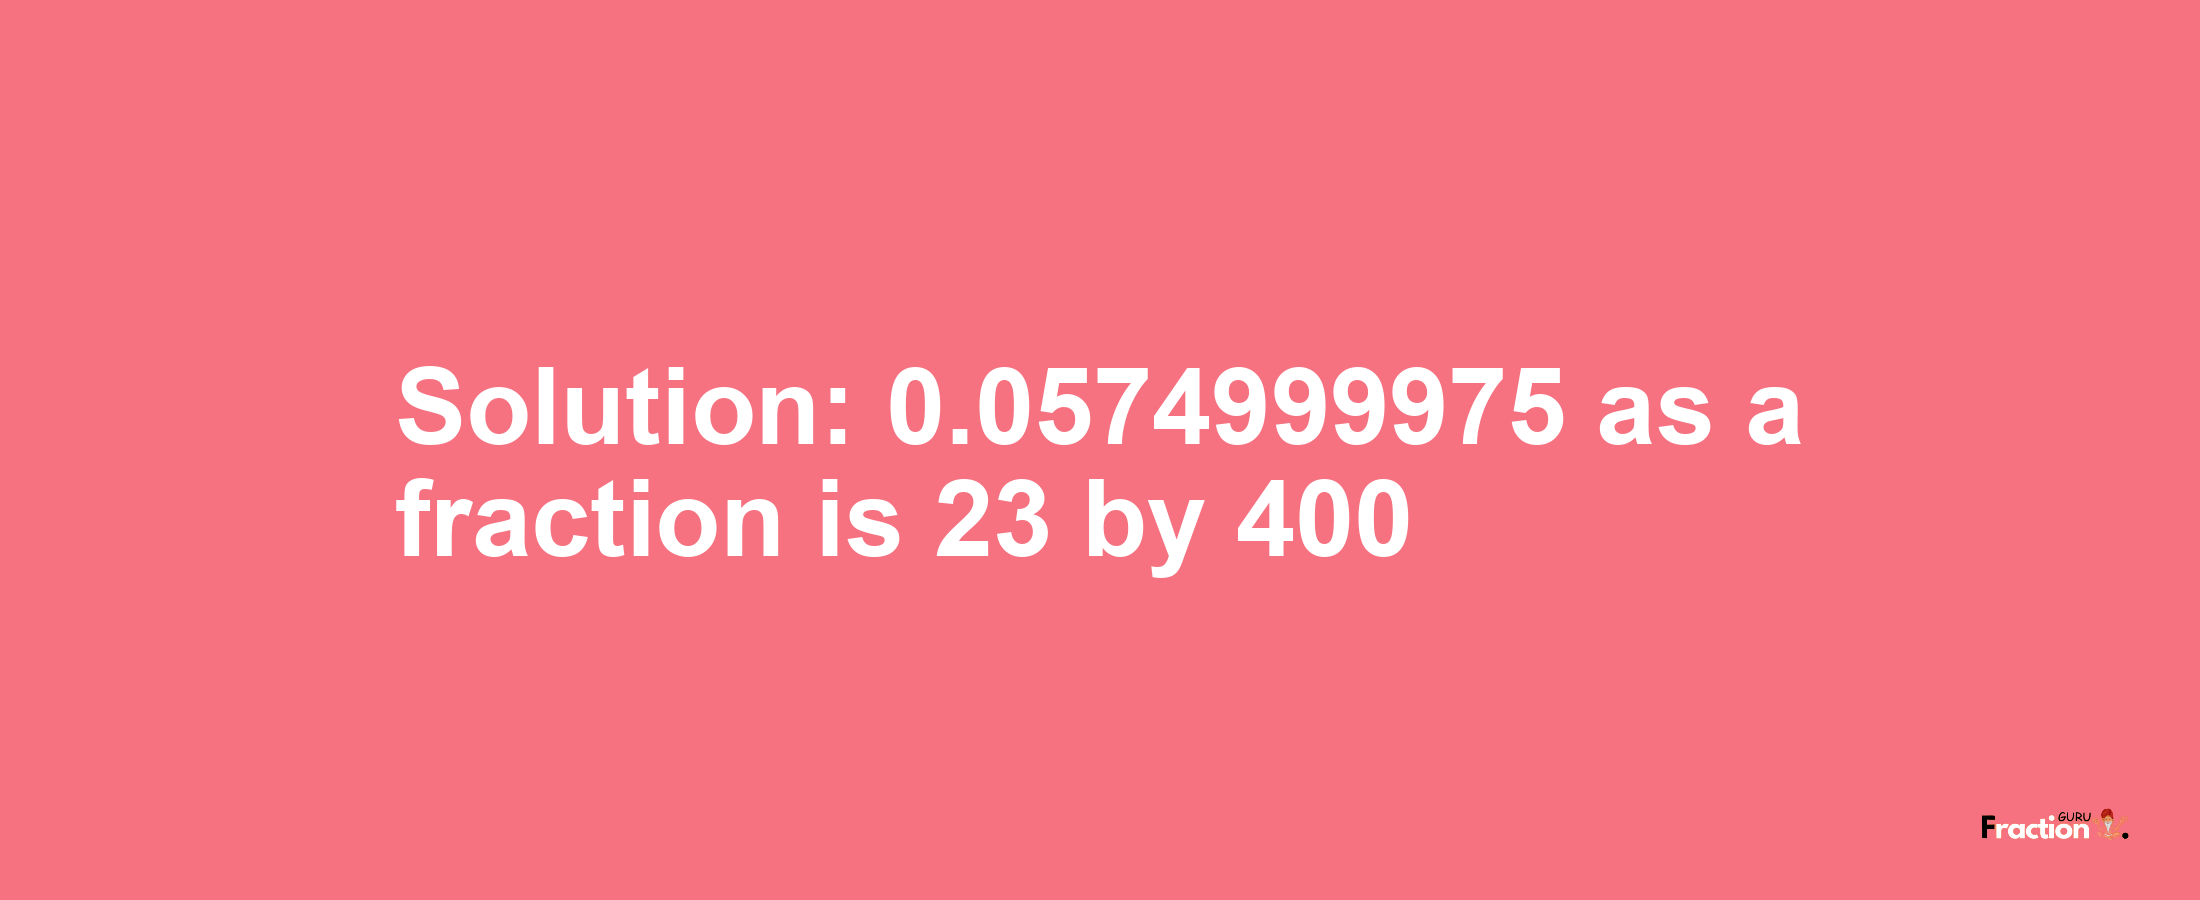 Solution:0.0574999975 as a fraction is 23/400